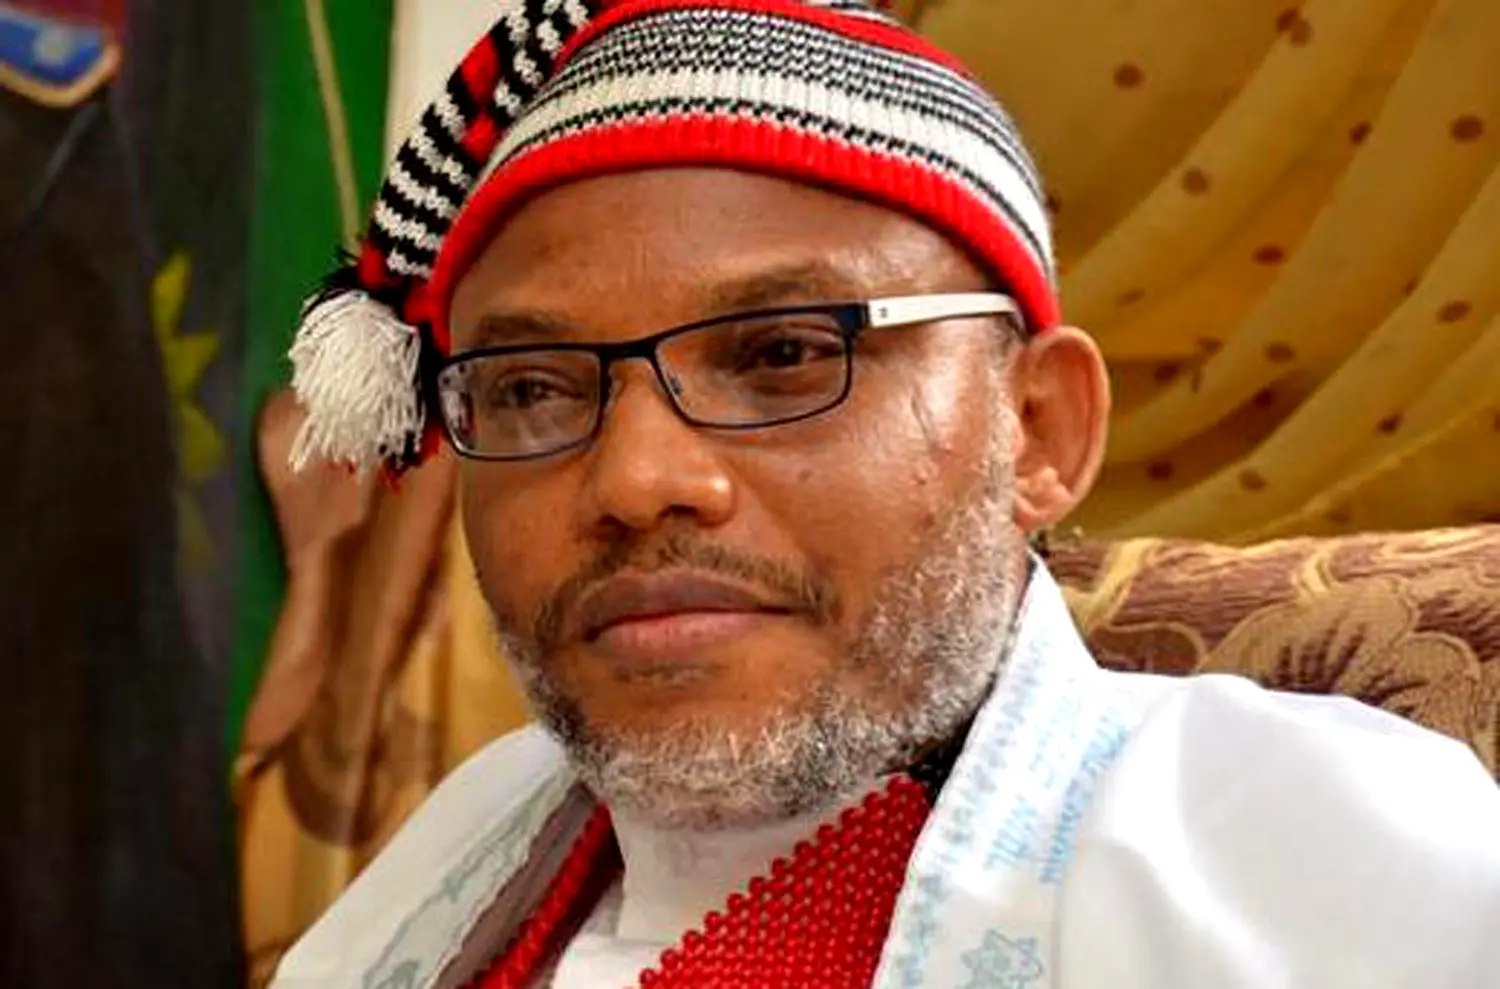 Nnamdi Kanu To Appear In Court Next Week Wednesday – Lawyer